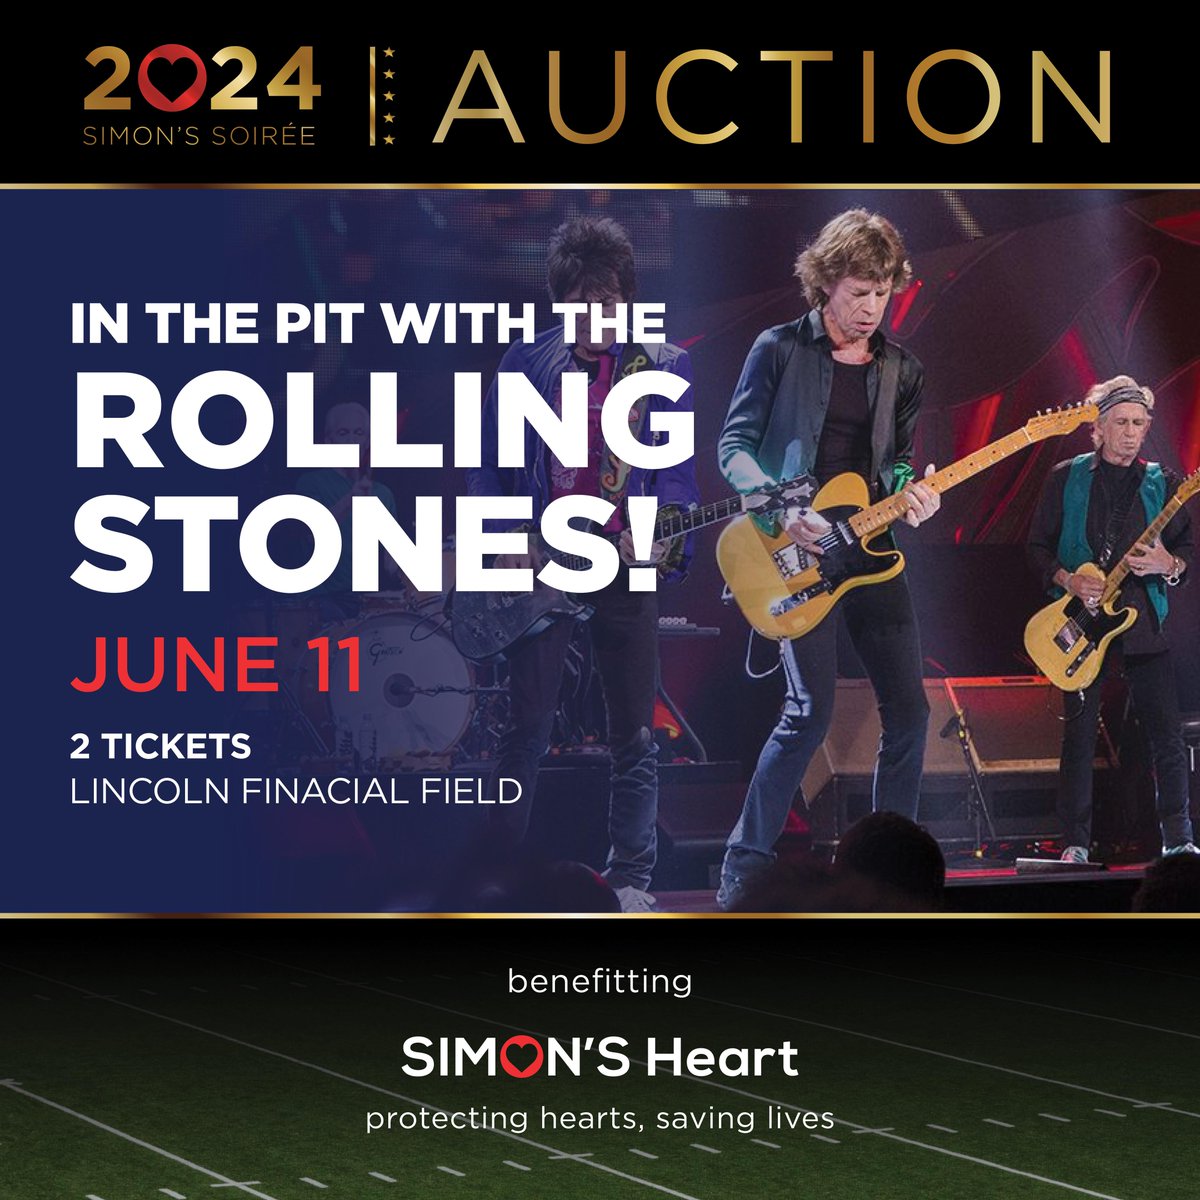 'You can't always get what you want...' But you CAN try to win two (2) tickets to the Rolling Stones on June 11th! We're auctioning off two (2) pit tickets at Lincoln Financial Field. You can't get much closer than that! Bid on this item here: bit.ly/42A30YN